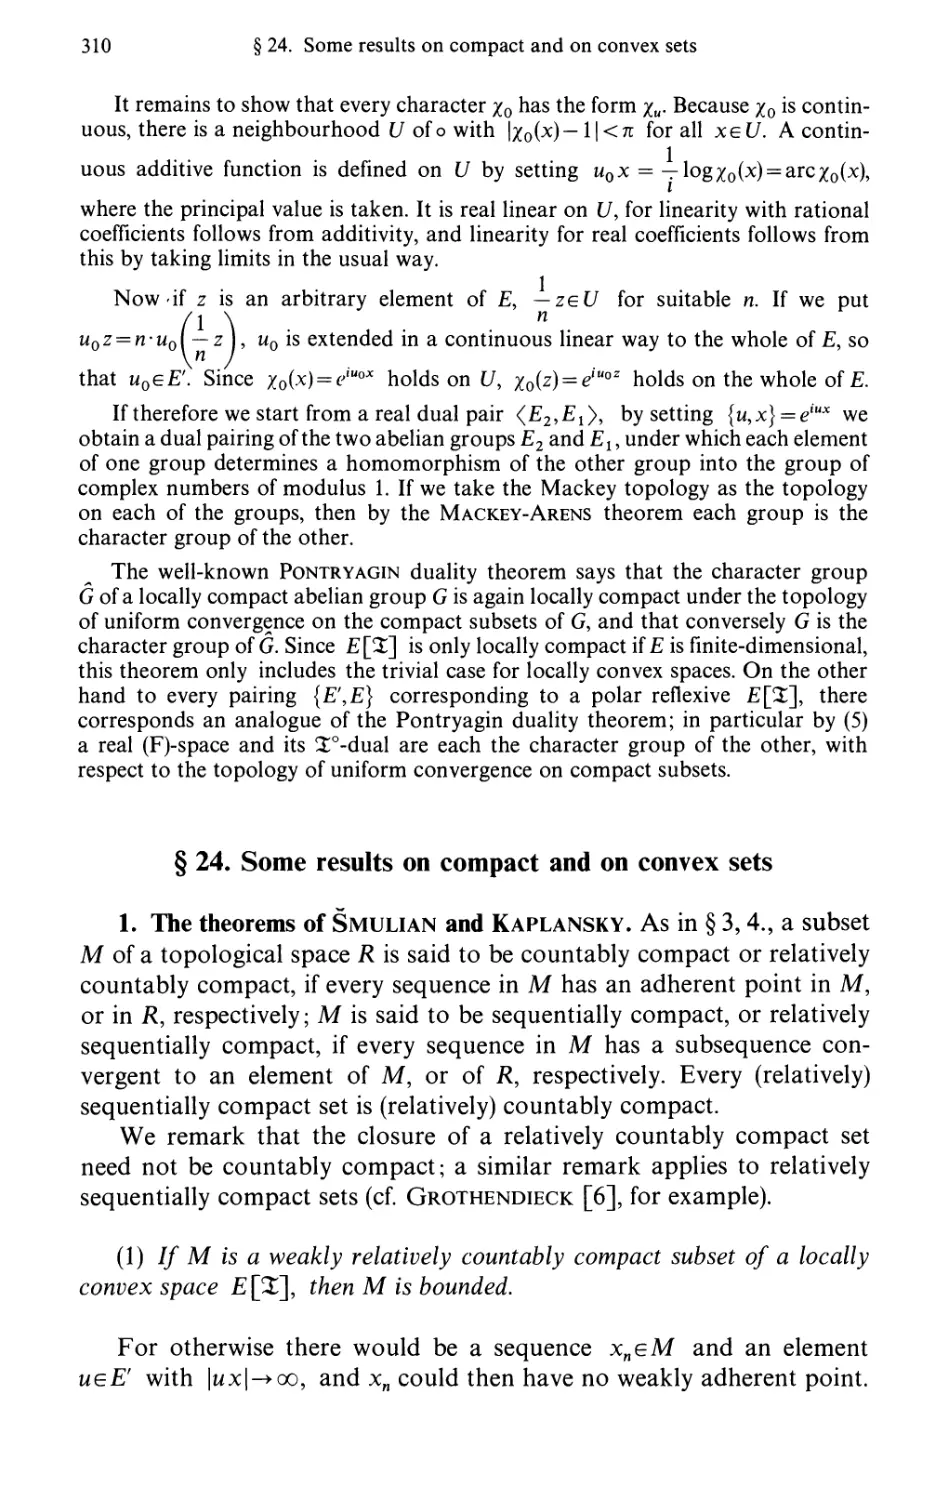 §24. Some results on compact and on convex sets